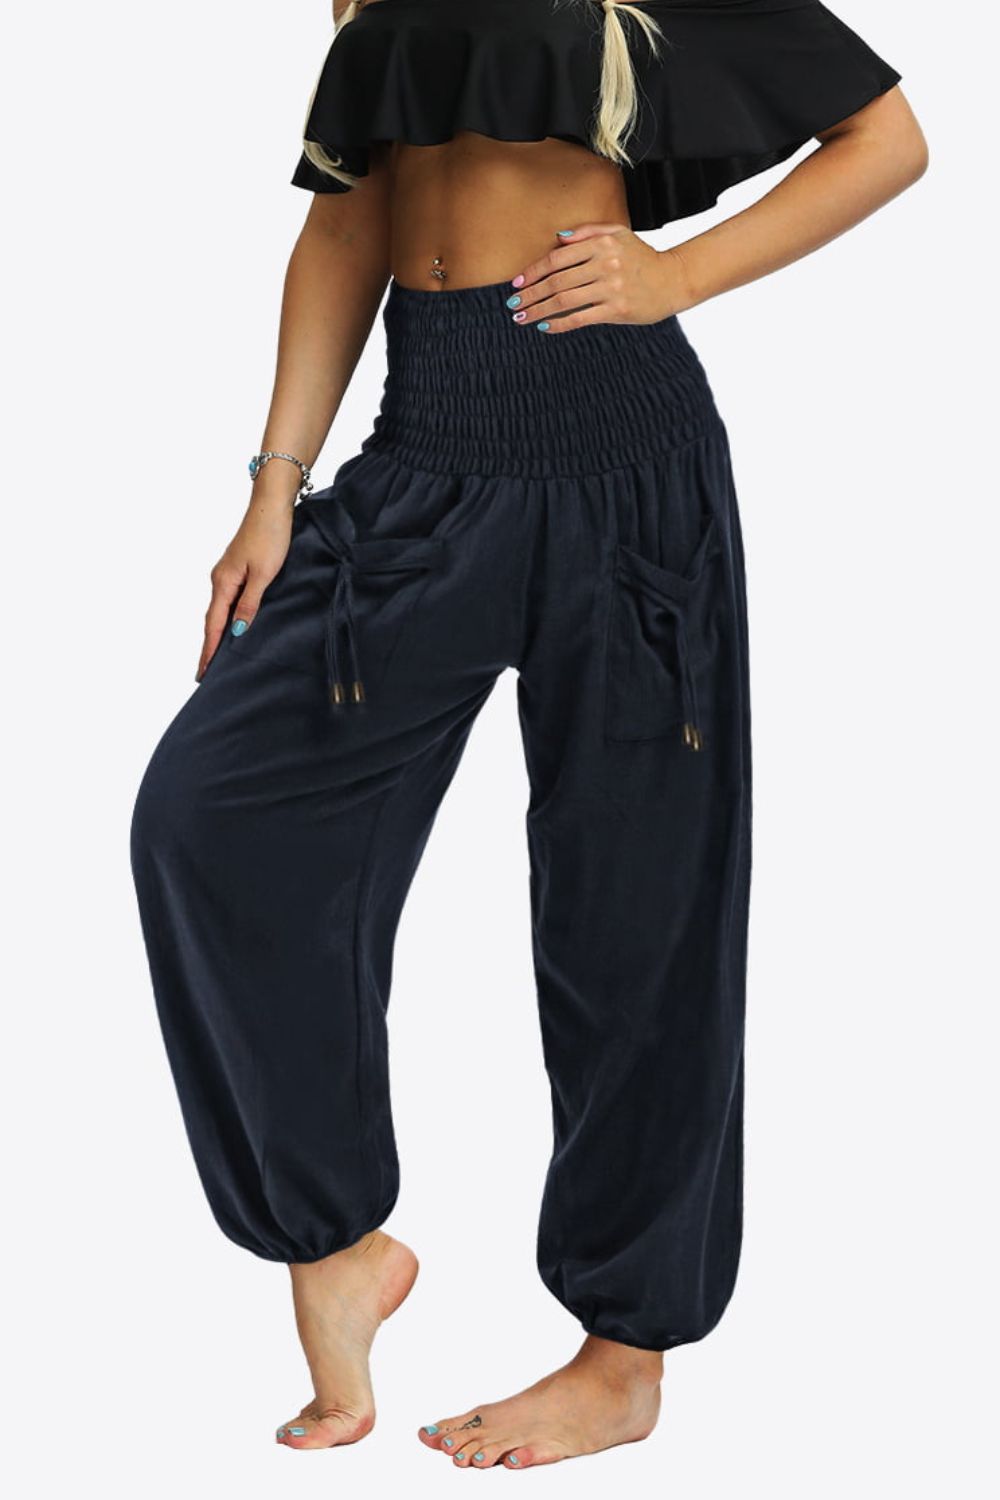 Smocked Long Joggers with Pockets - Dark Blue / S - Bottoms - Pants - 1 - 2024